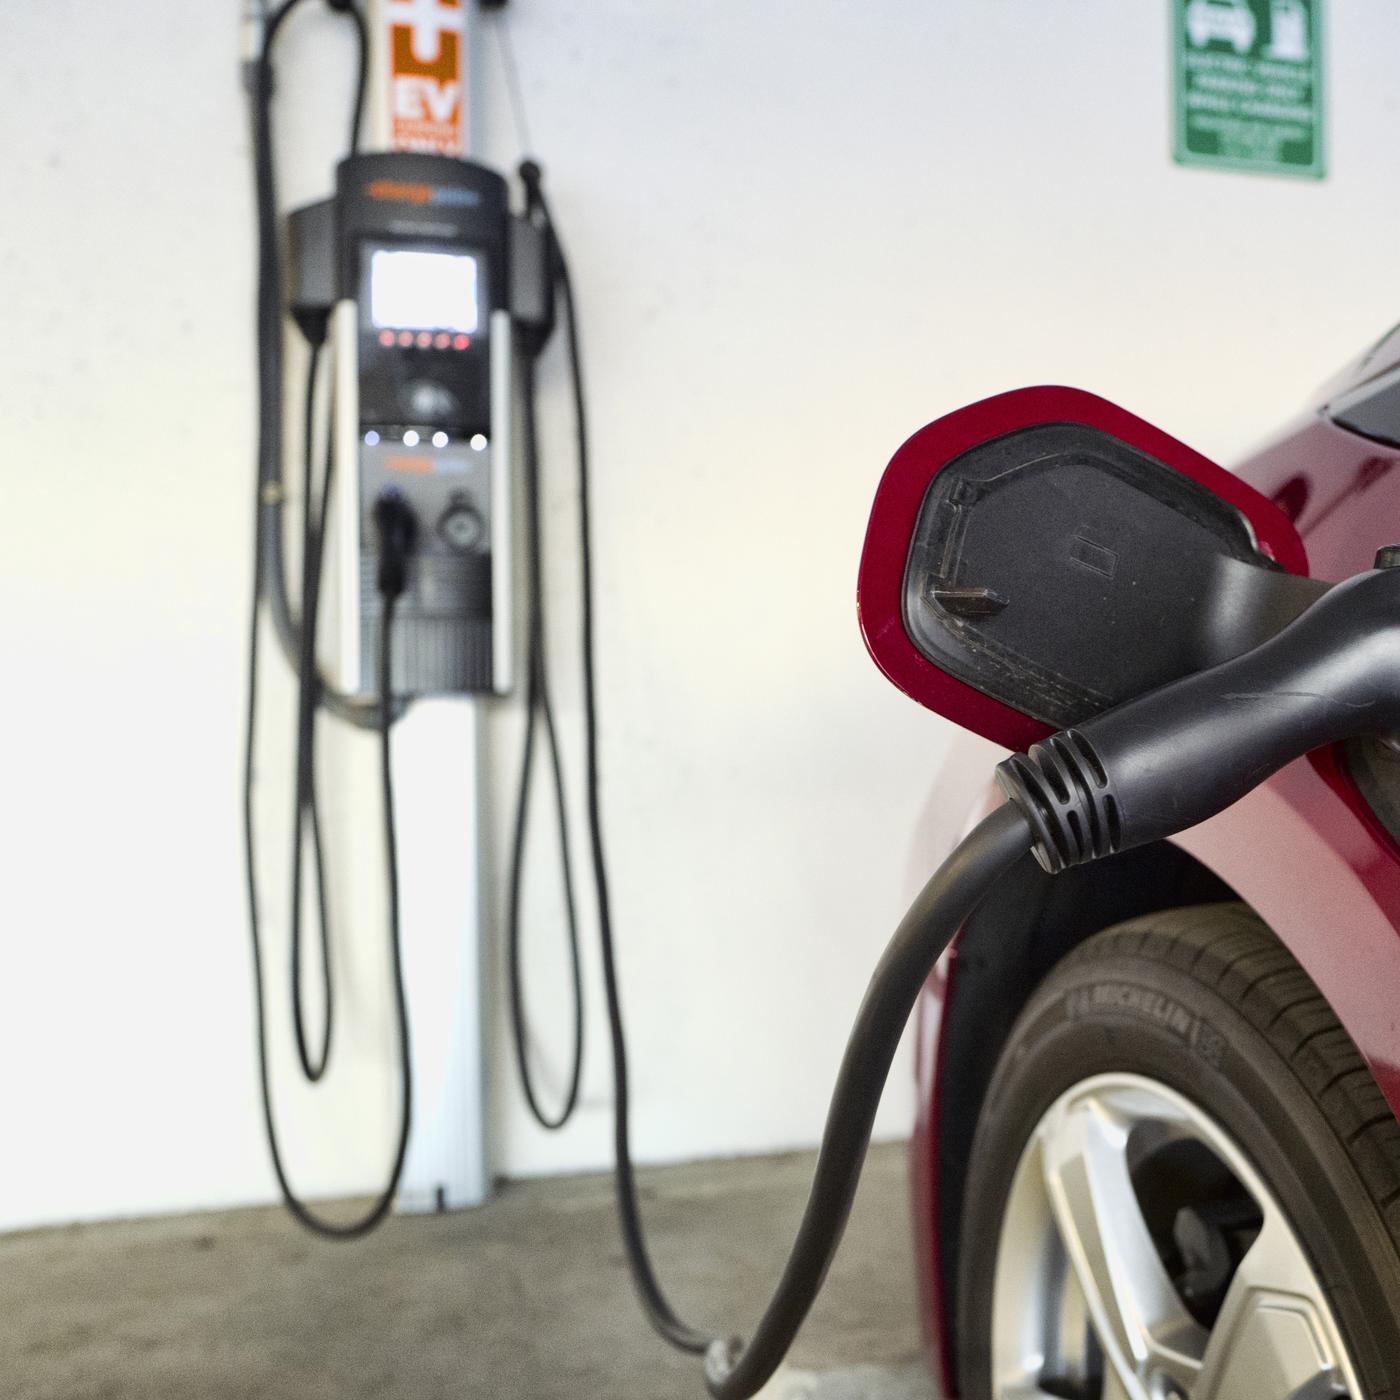 All Charged Up and No Place to Go: The Promise and Pitfalls of
Electric Vehicles